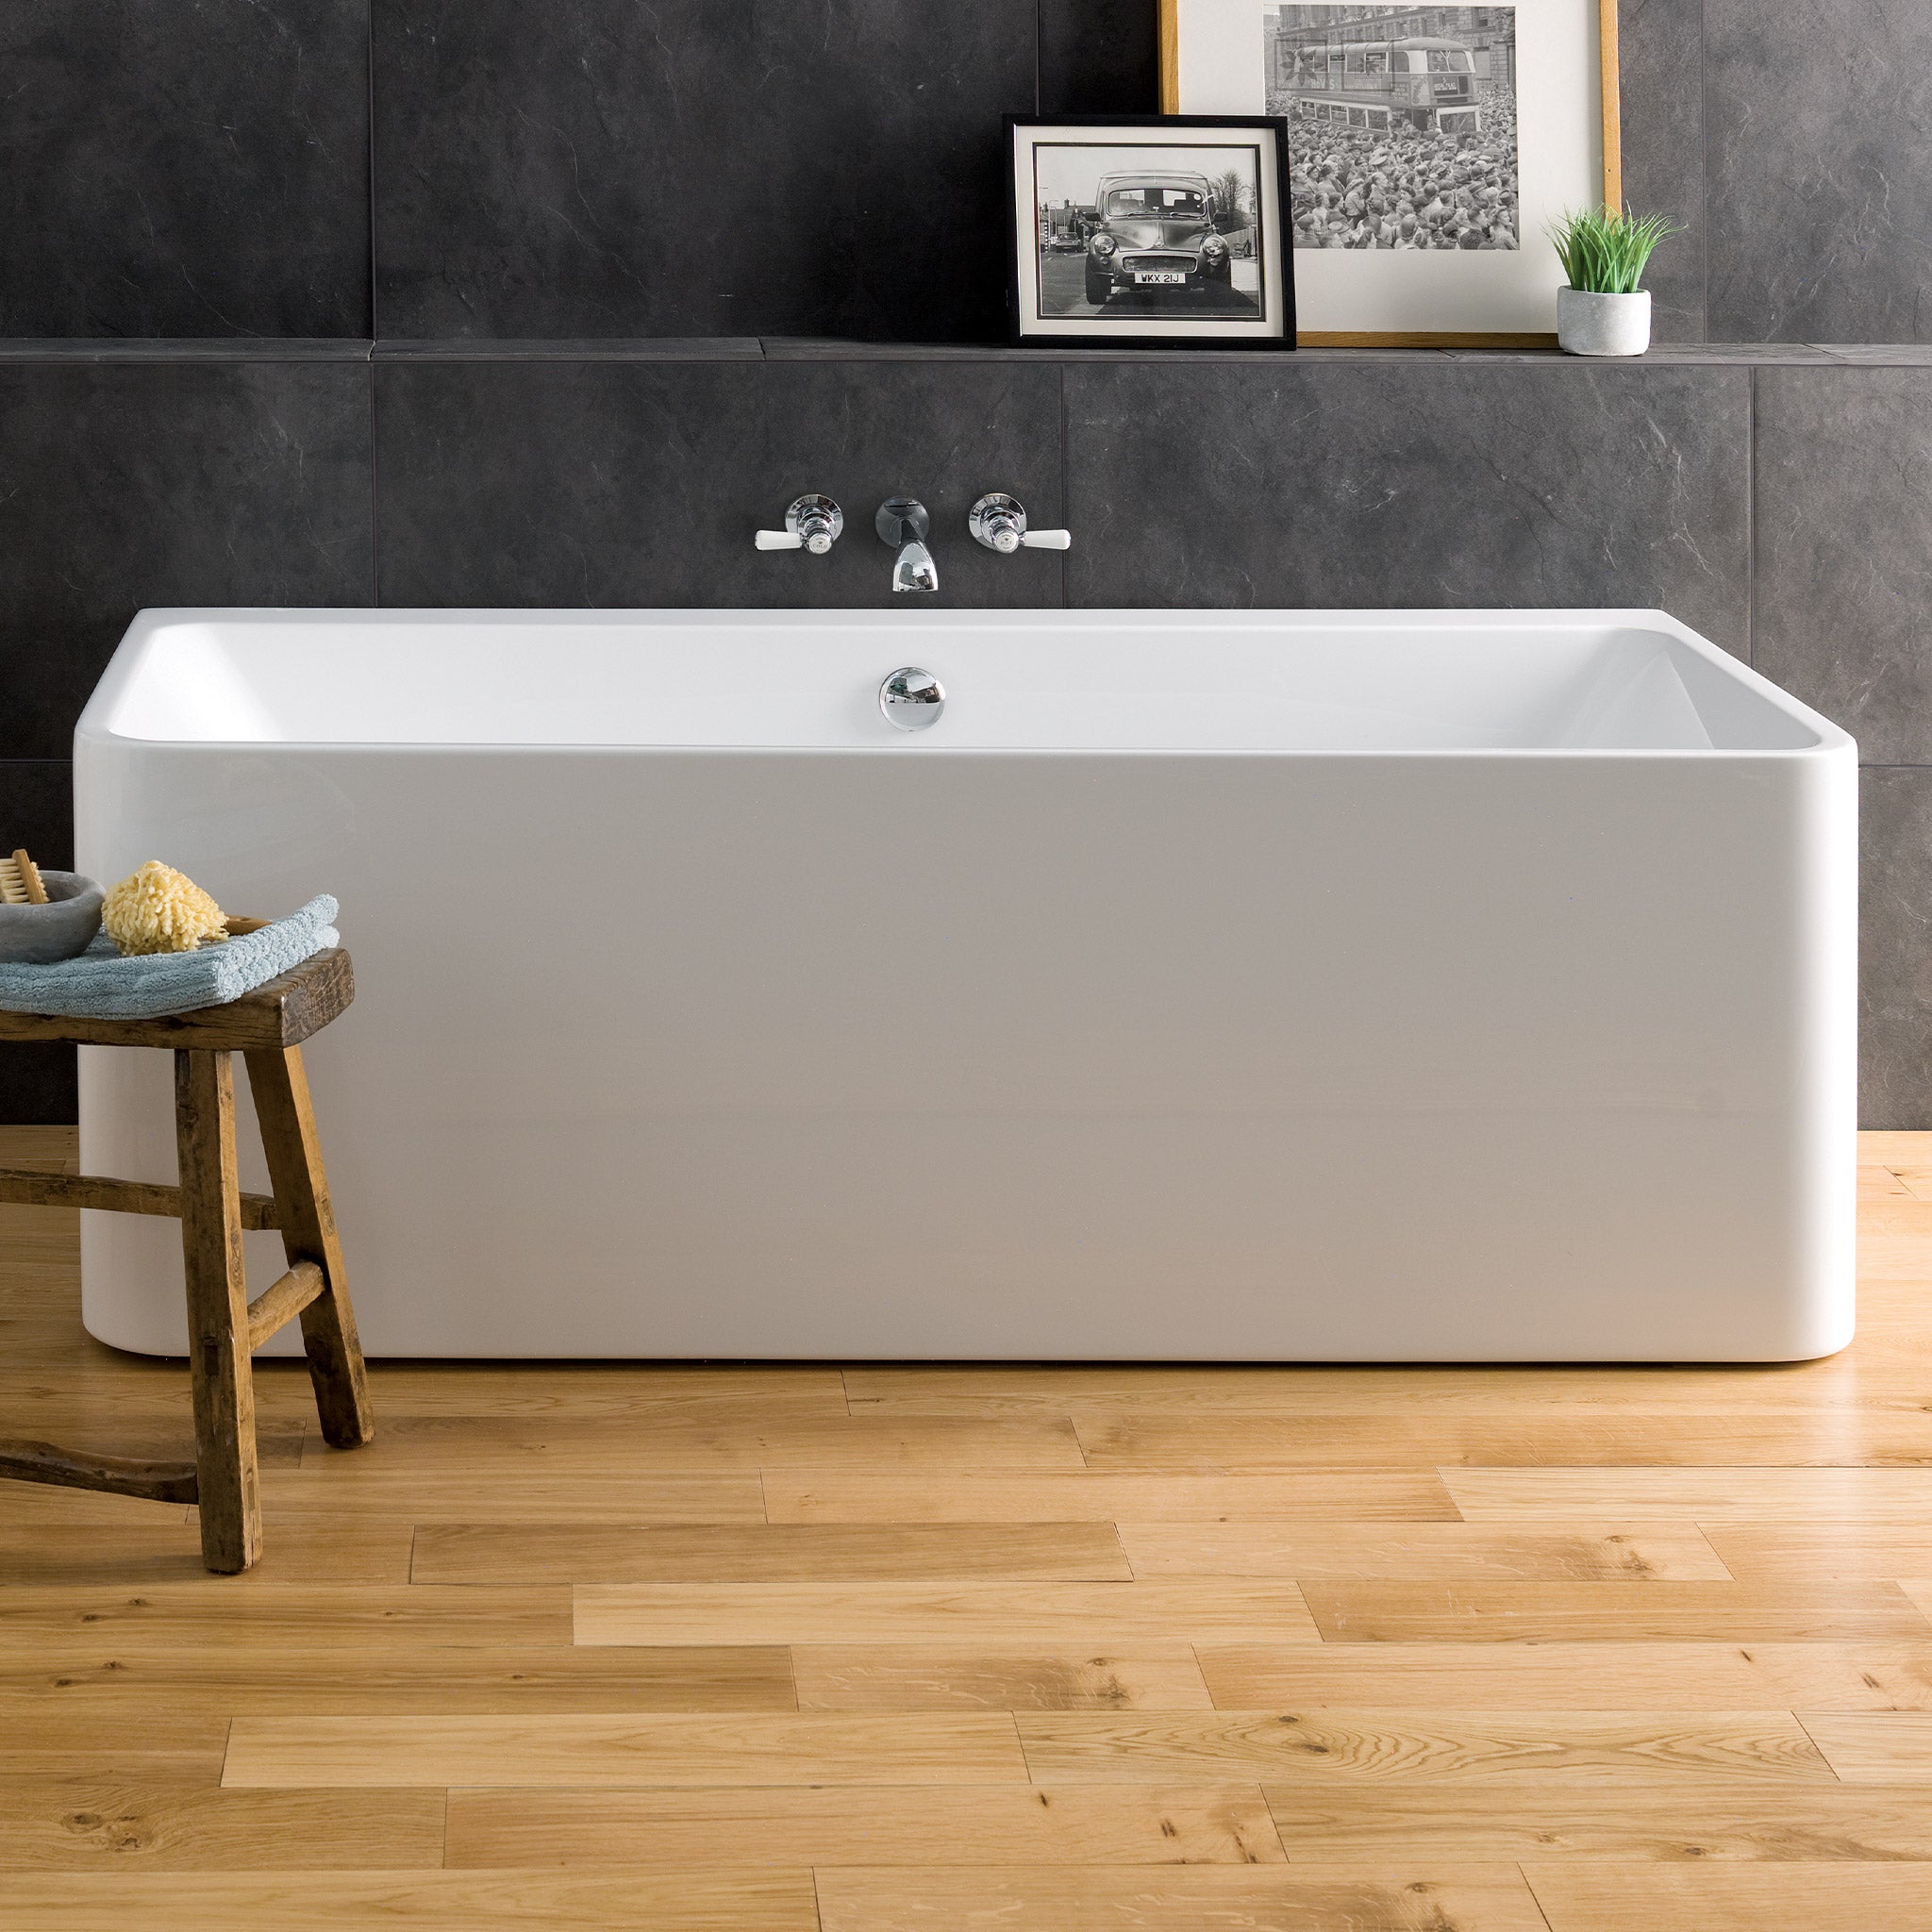 BC Designs Murali Double Ended Acrymite Bath 1720 x 740mm